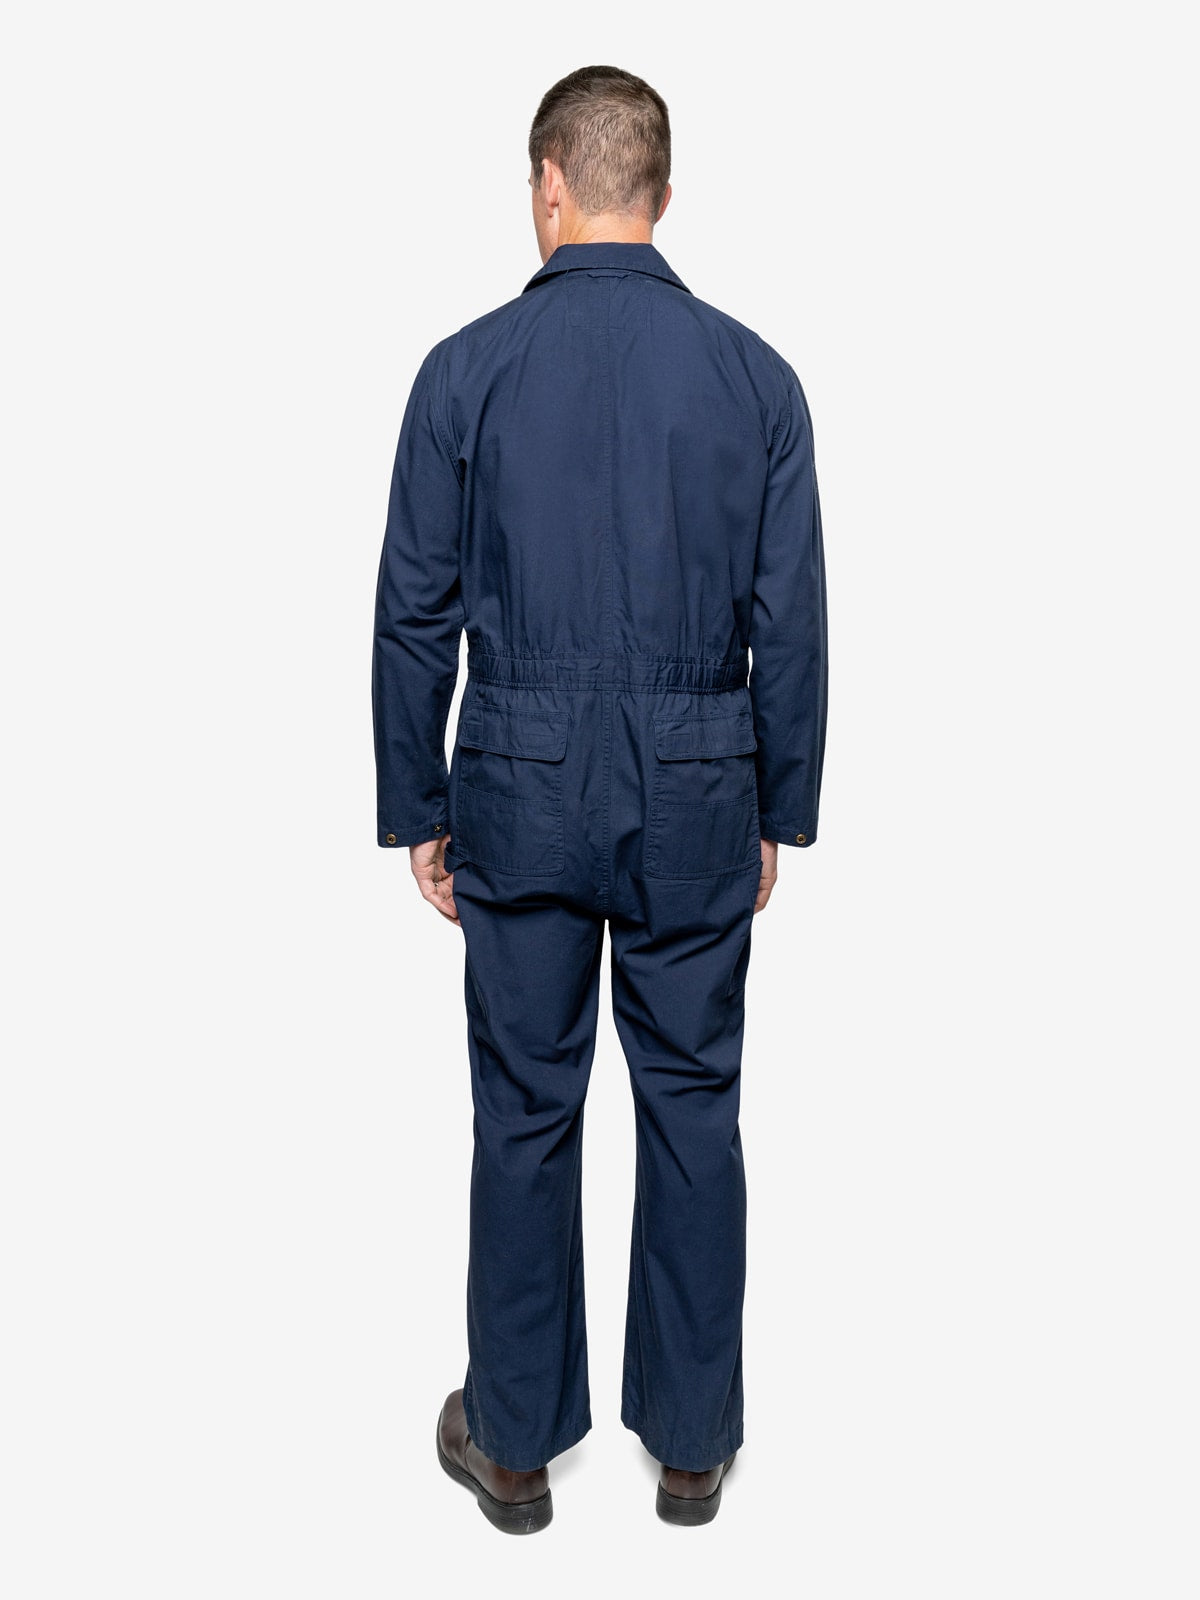 Insect Shield Men's Lightweight Cotton Coverall